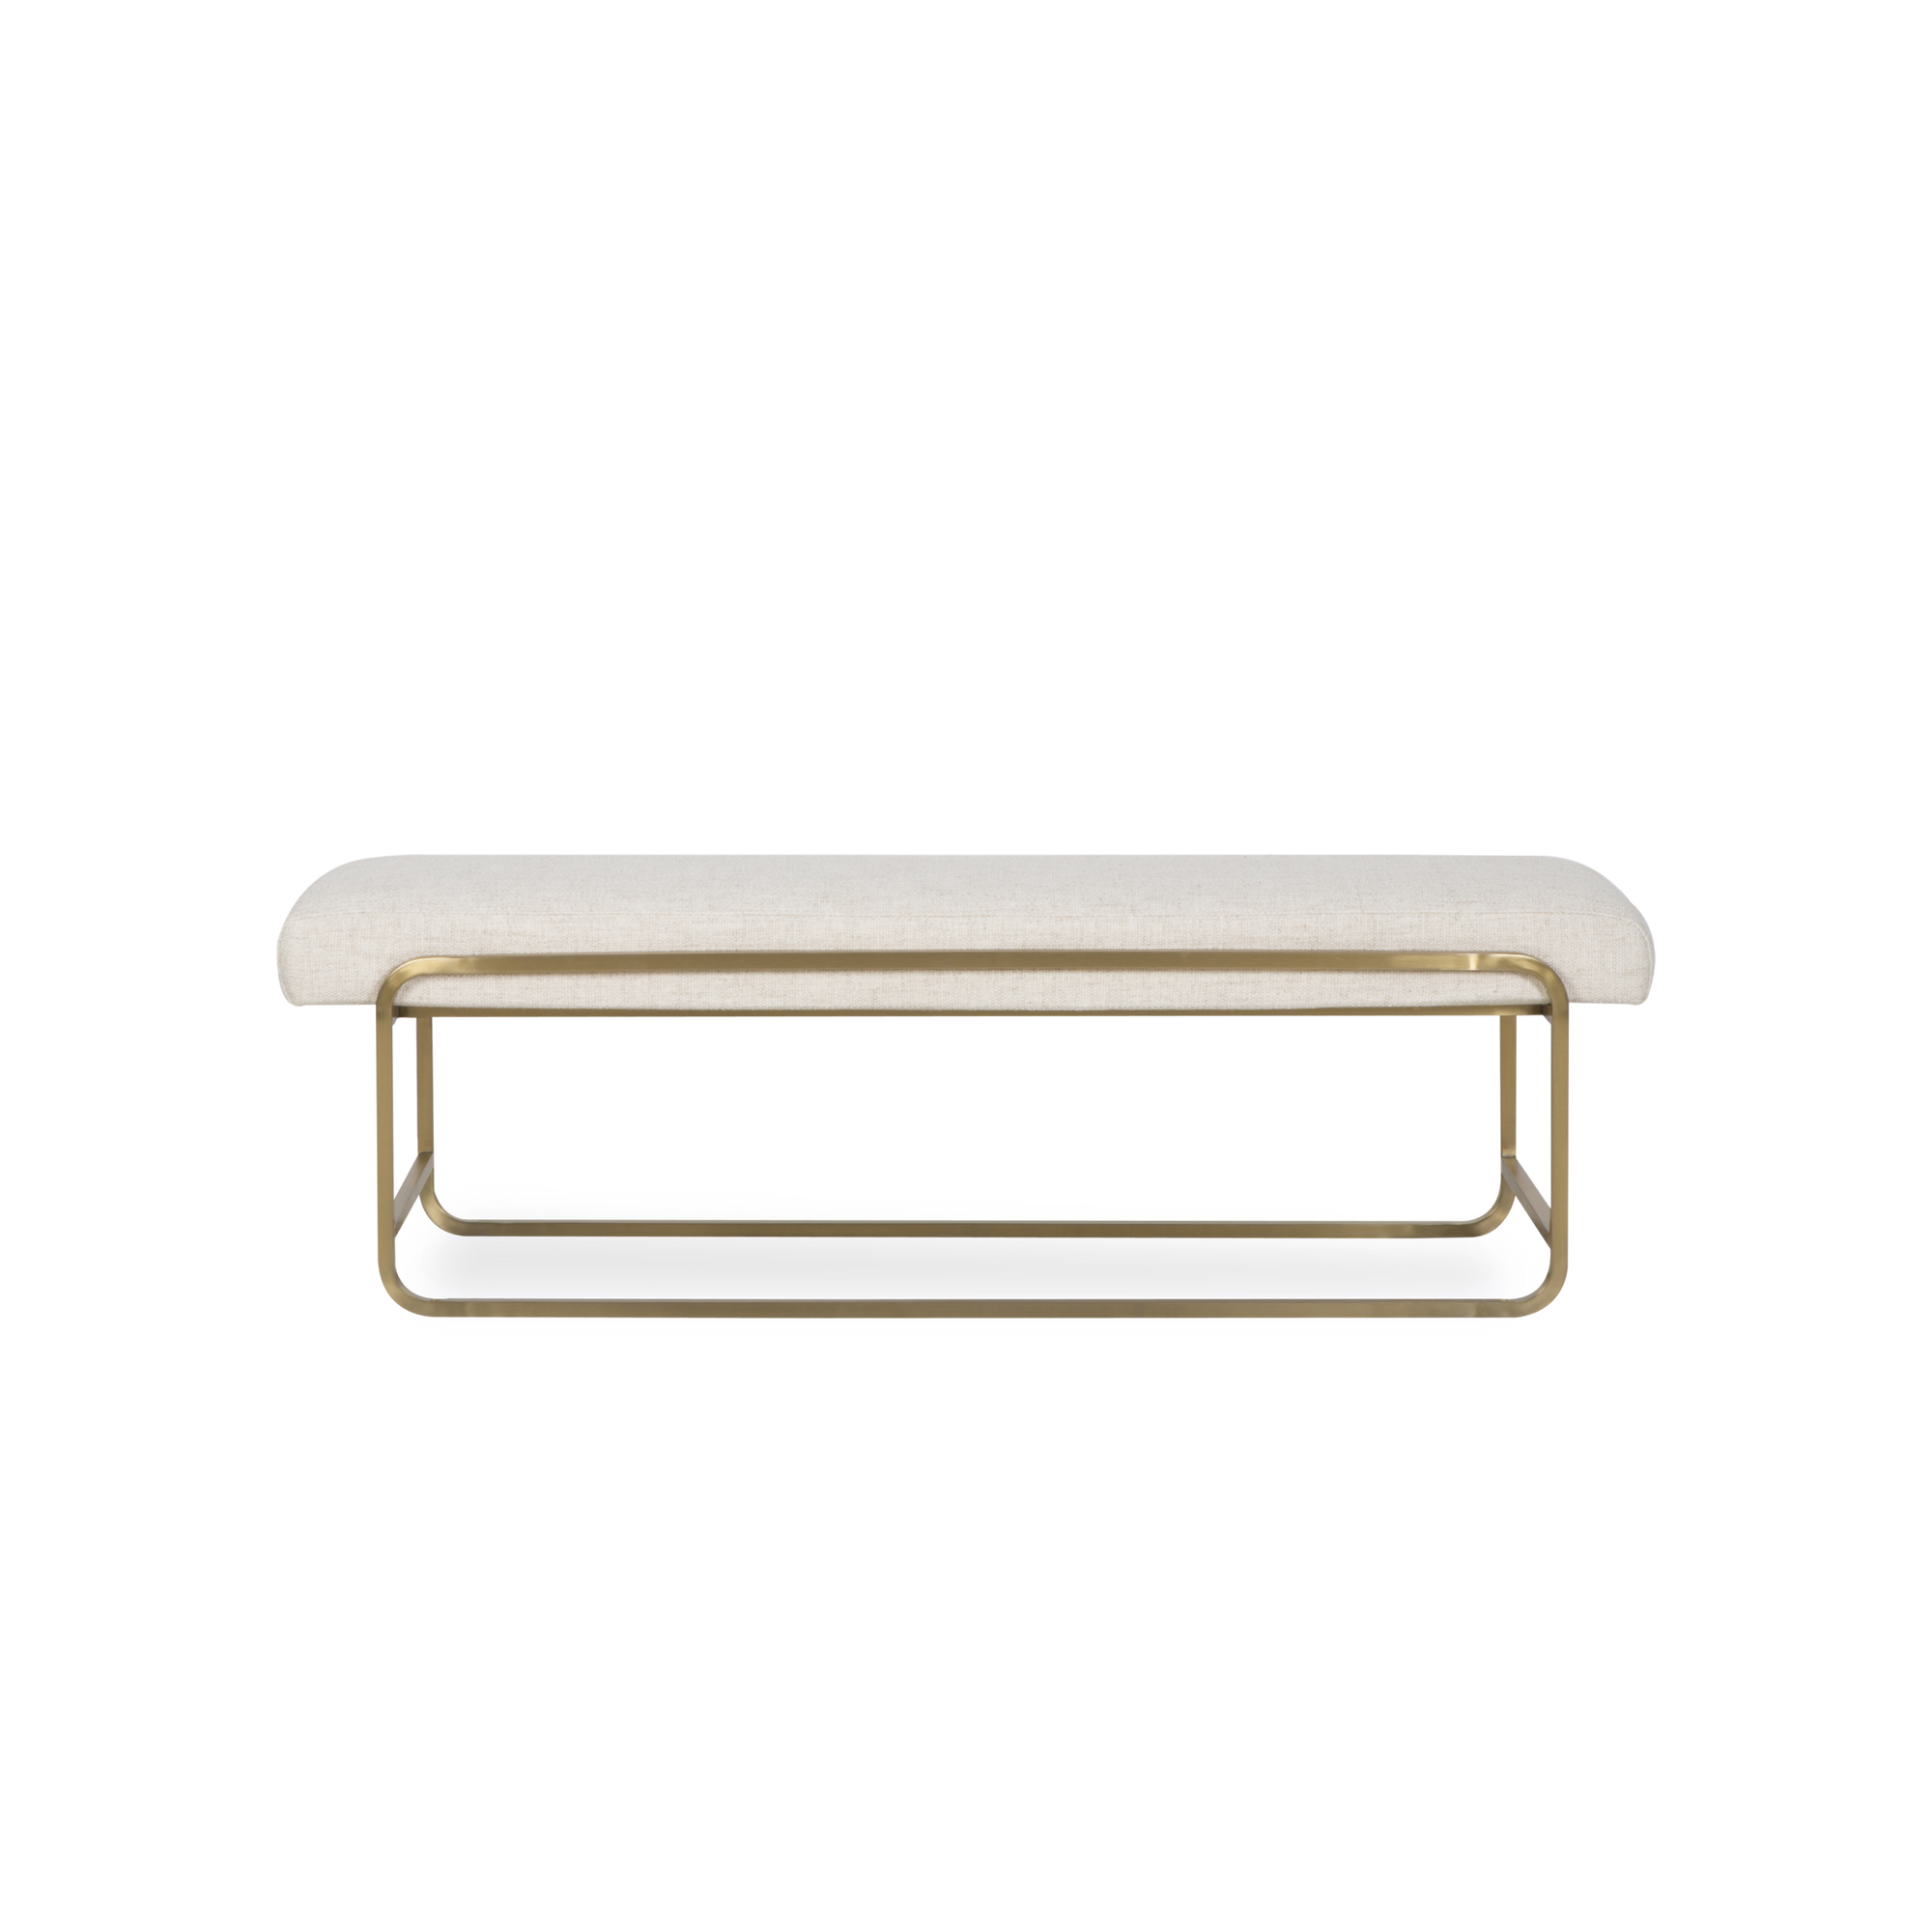 Dramatic bullnose edging meets elegant brass-finished steel framing for fresh, thoughtful balance, while performance-grade upholstered seating delivers a hint of glam and plenty of